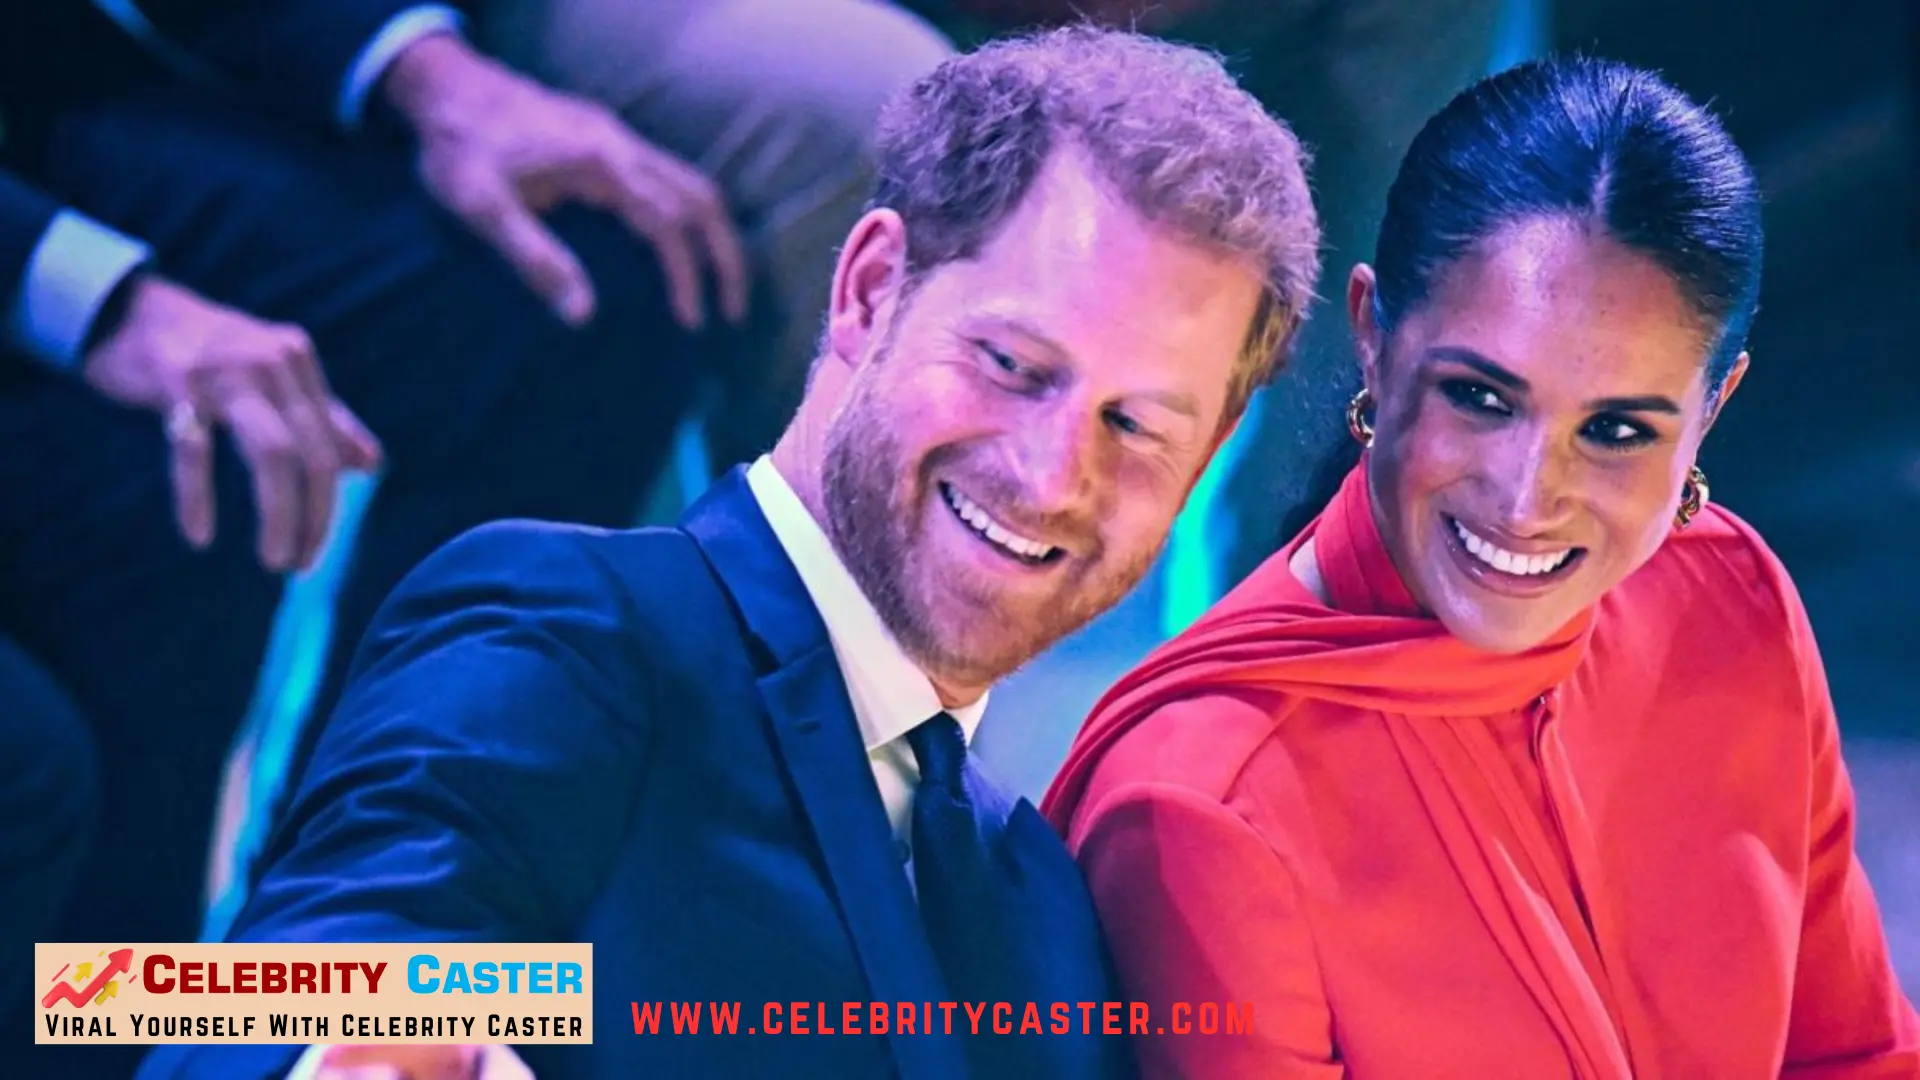 Meghan Markle and Prince Harry's Surprise Red Carpet Moment at 'Bob Marley One Love' Premiere